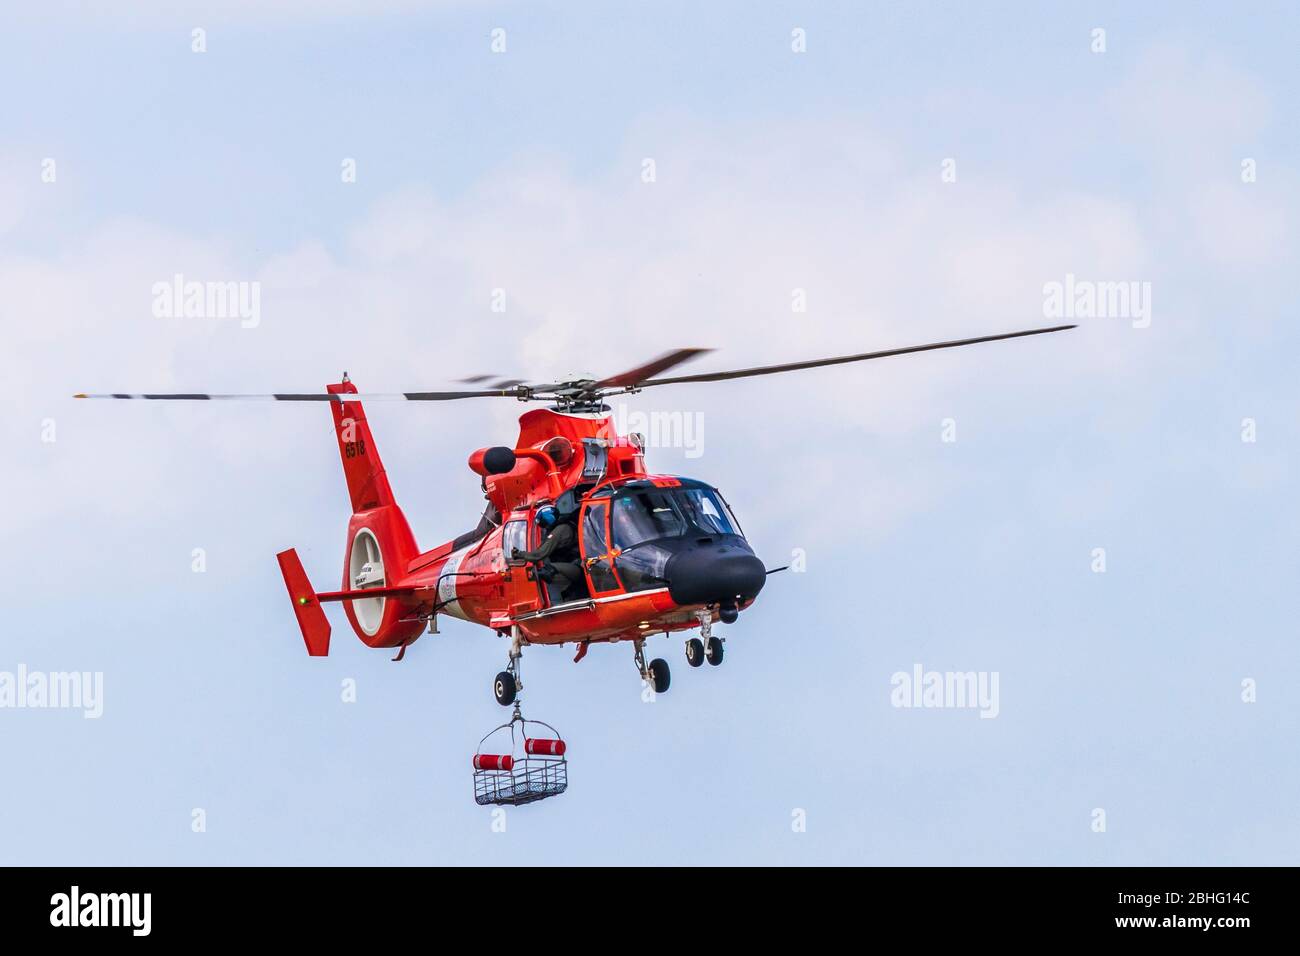 US Coast Guard MH-65 Dolphin Helicopter demonstrating rescue procedures at 2019 Wings Over Houston at Ellington Field in Houston, Texas. Stock Photo